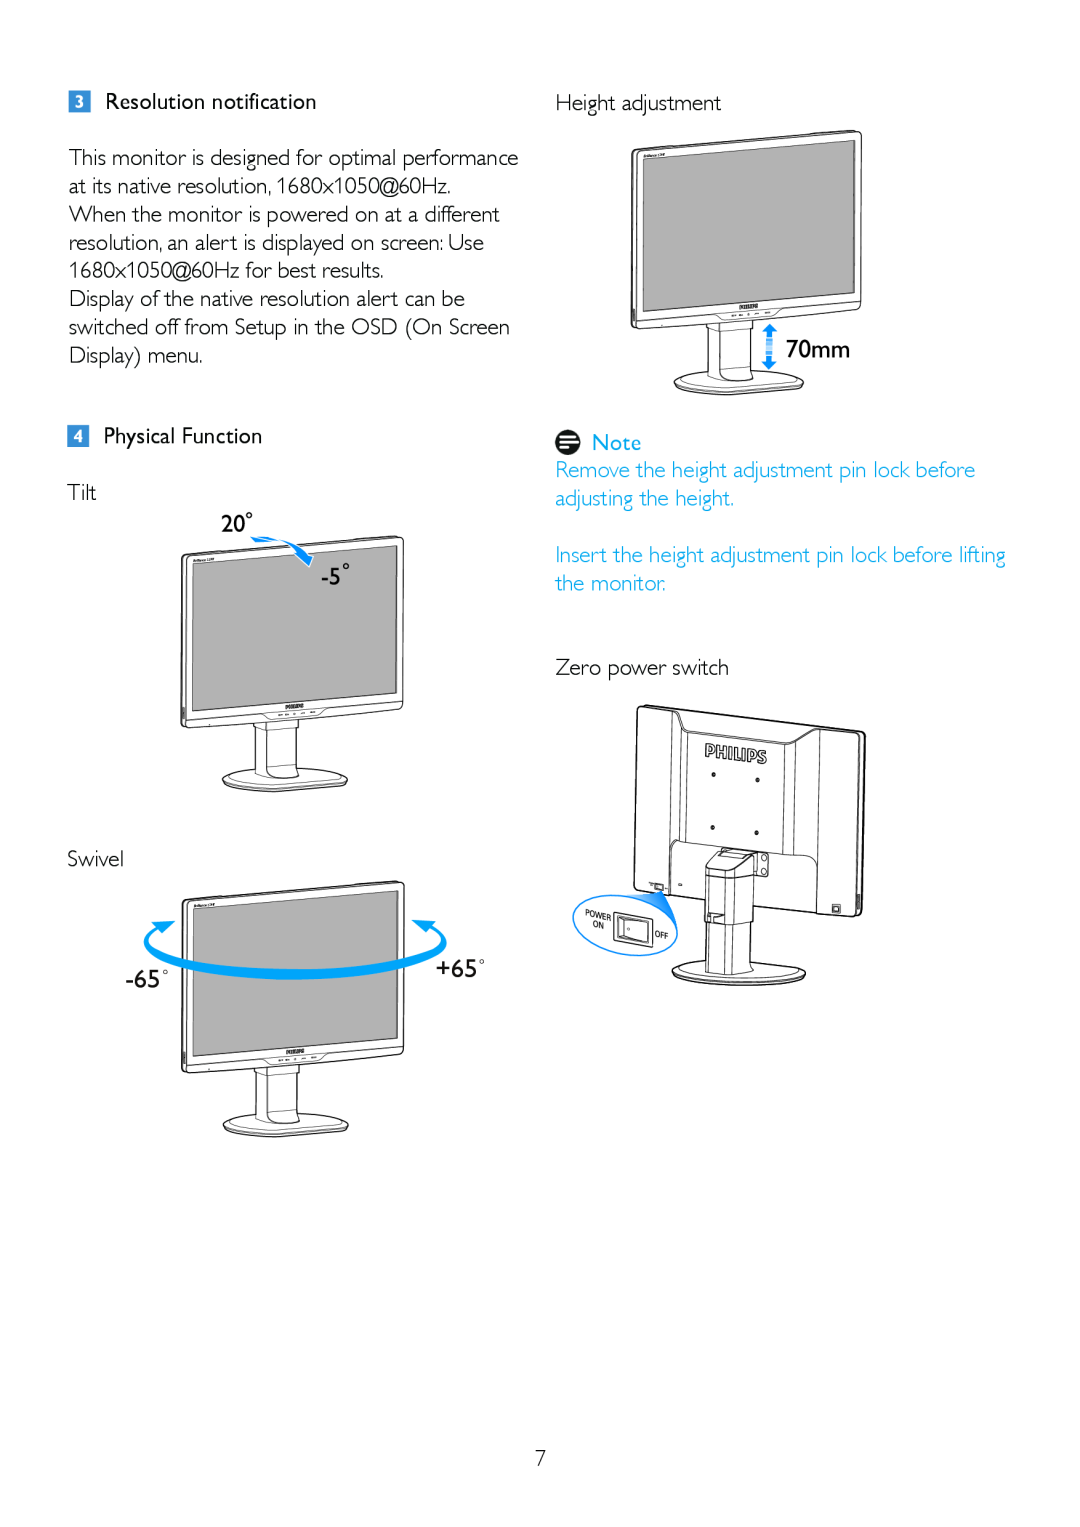 Philips 220BL2 Remove the height adjustment pin lock before adjusting the height, 65˚+65˚, Resolution notification, Swivel 